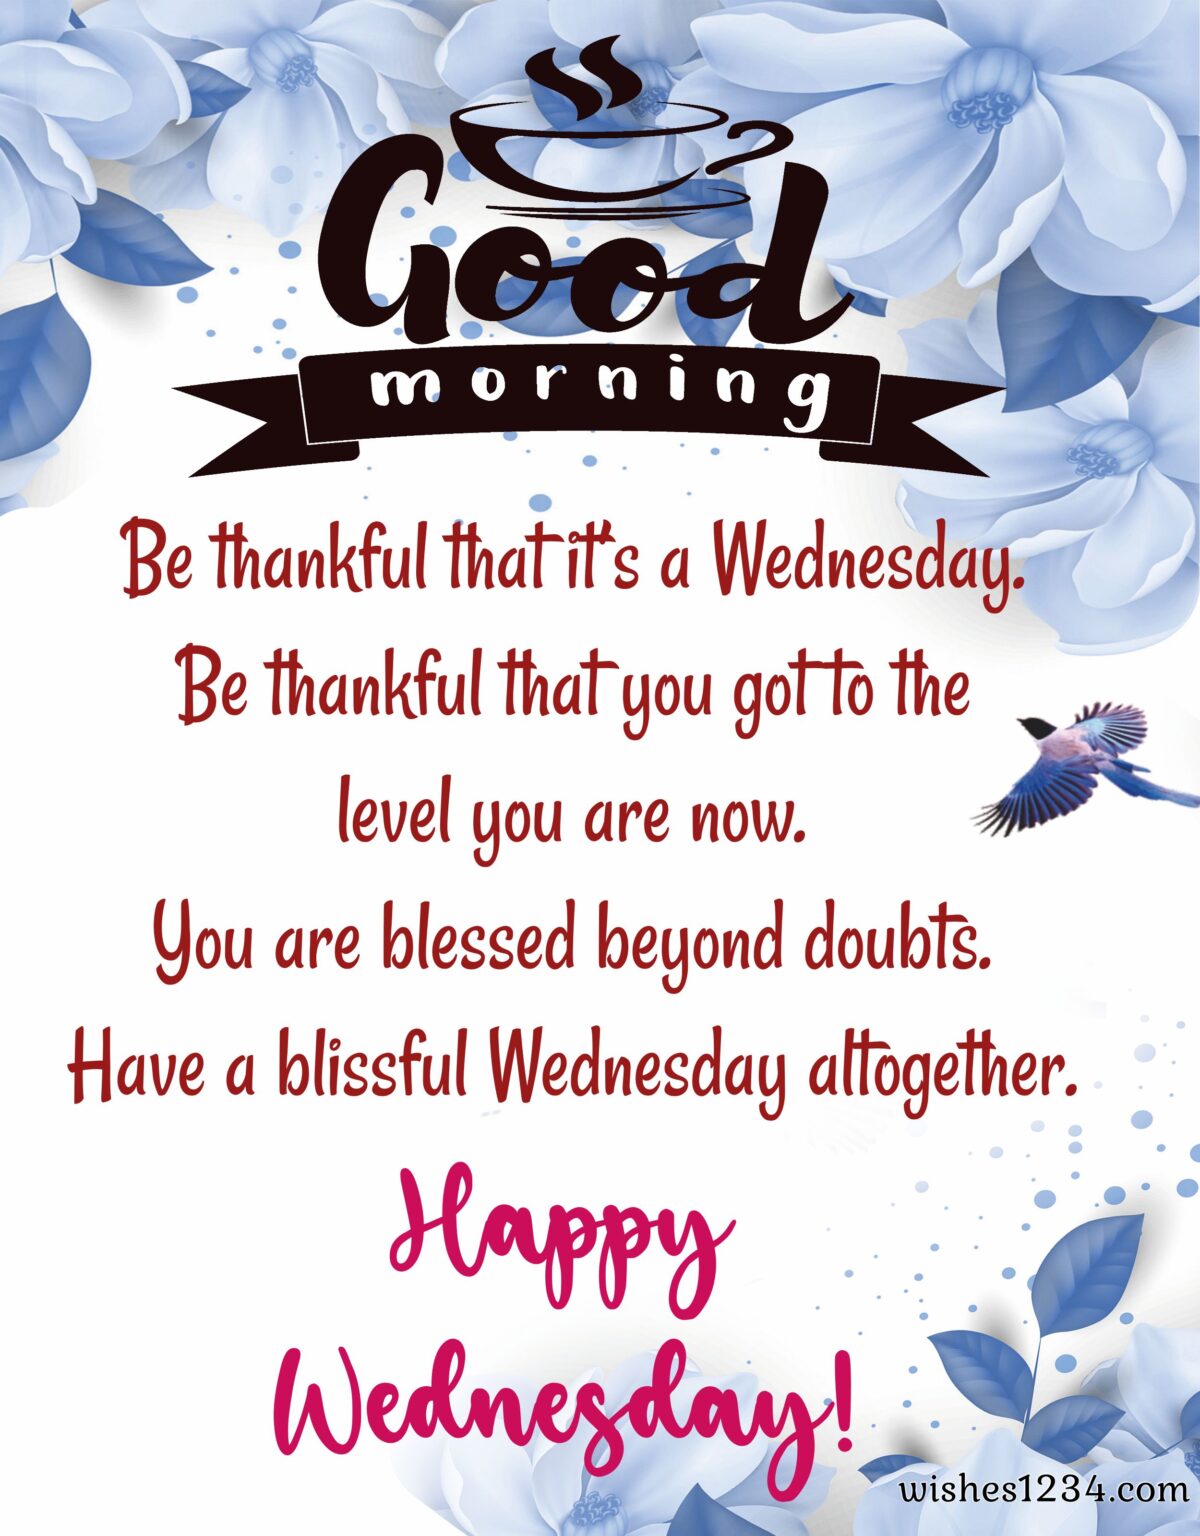 100+ Wednesday quotes, wishes, blessings, messages and happy hump day